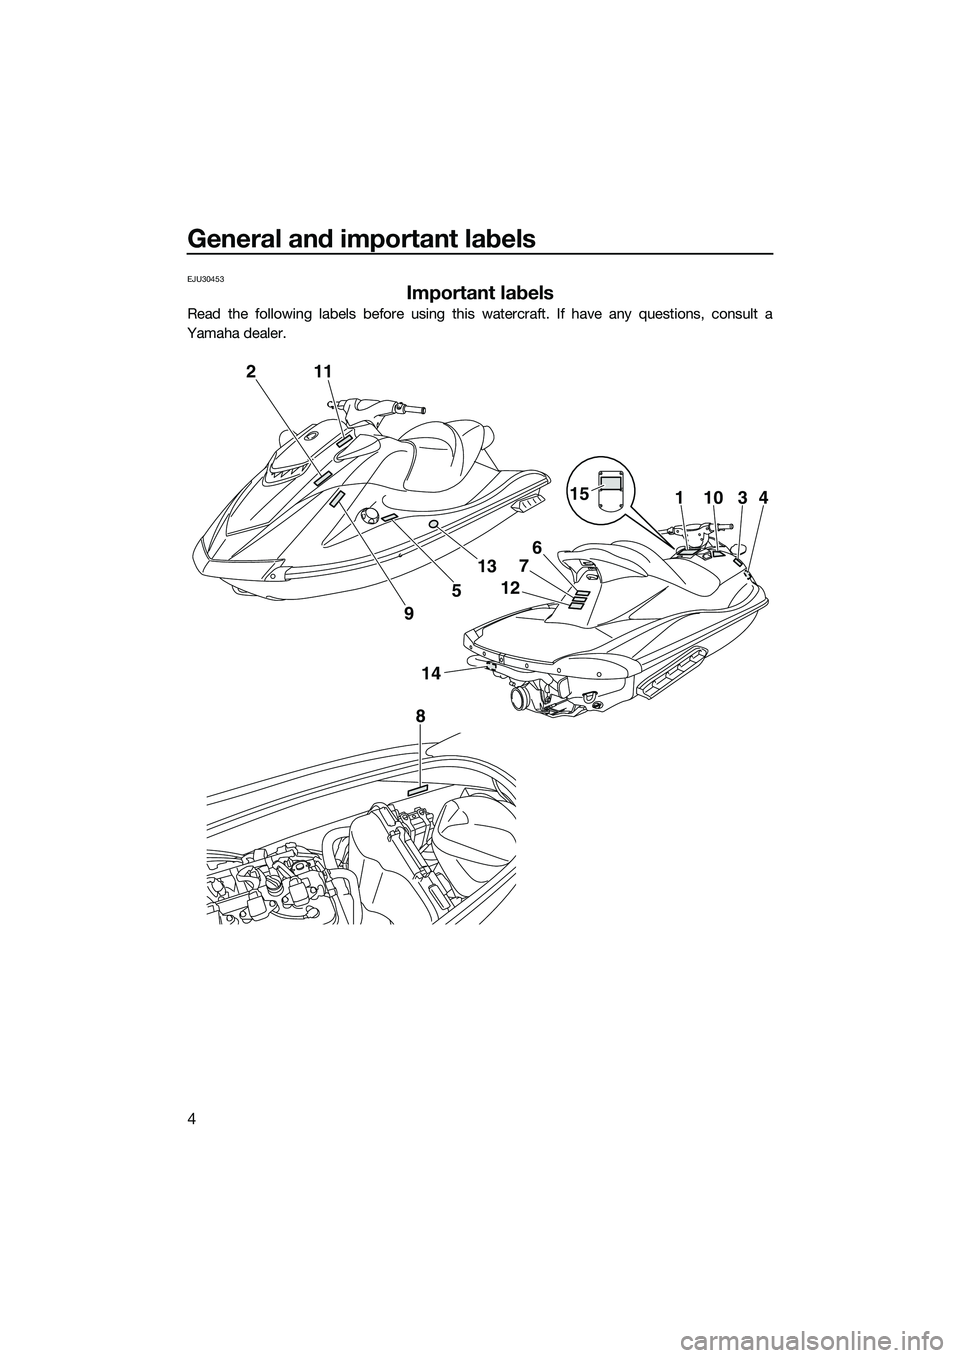 YAMAHA VXS 2014  Owners Manual General and important labels
4
EJU30453
Important labels
Read the following labels before using this watercraft. If have any questions, consult a
Yamaha dealer.
2
14
8
15
6
7
12
11034
11
9
5
13
UF2M73